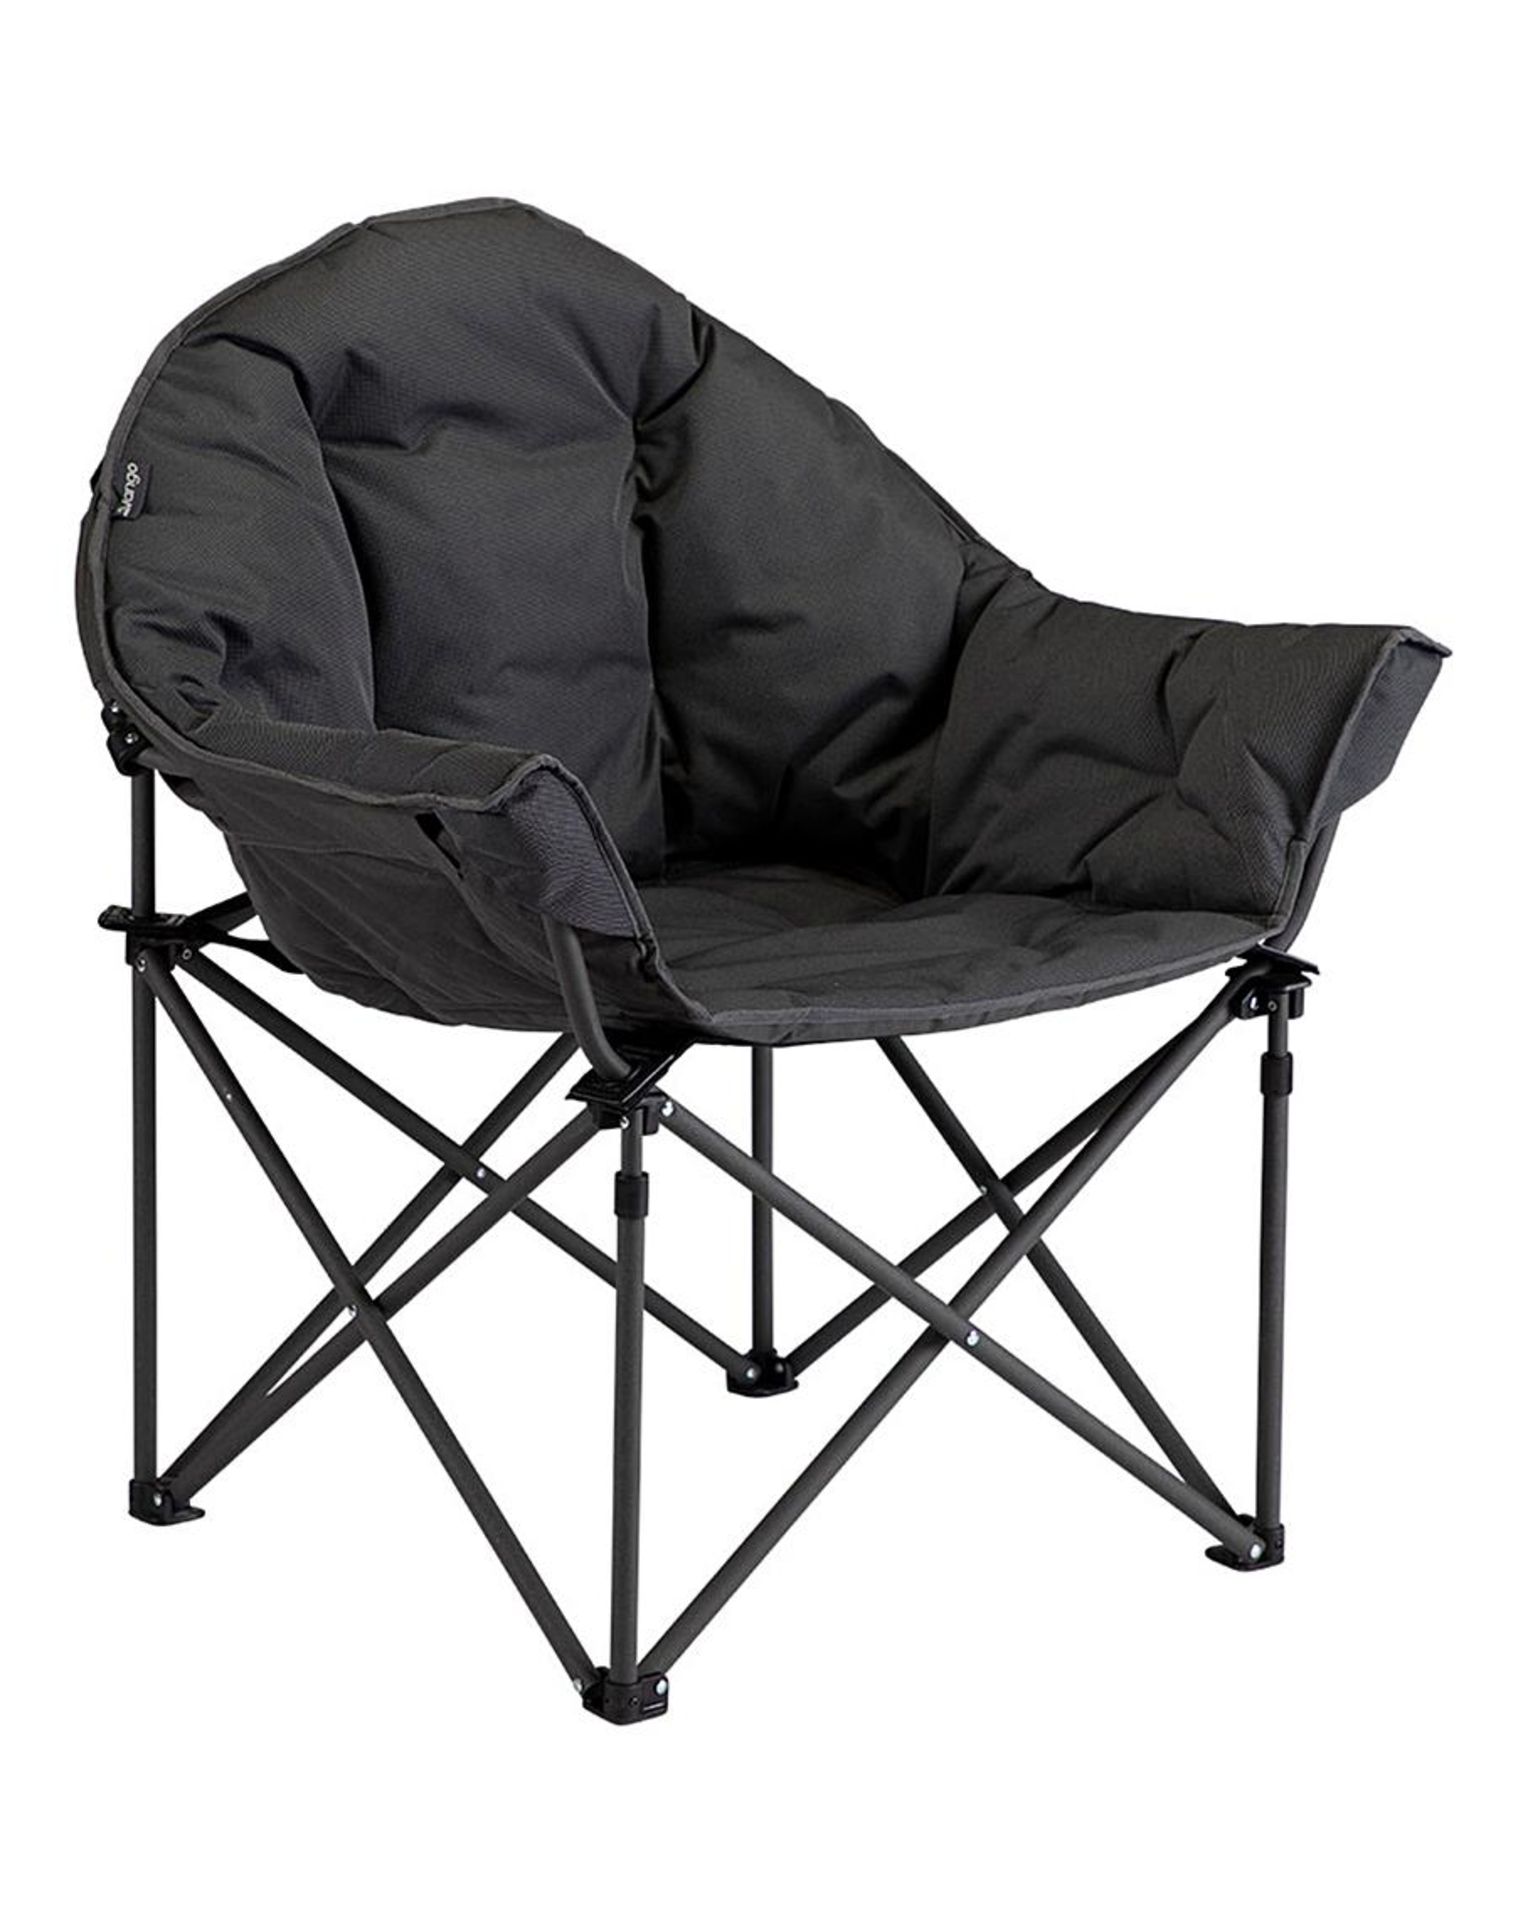 Vango Titan 2 Oversized Chair. - SR5. RRP £159.00. Snuggle up in the encompassing Titan Chair,